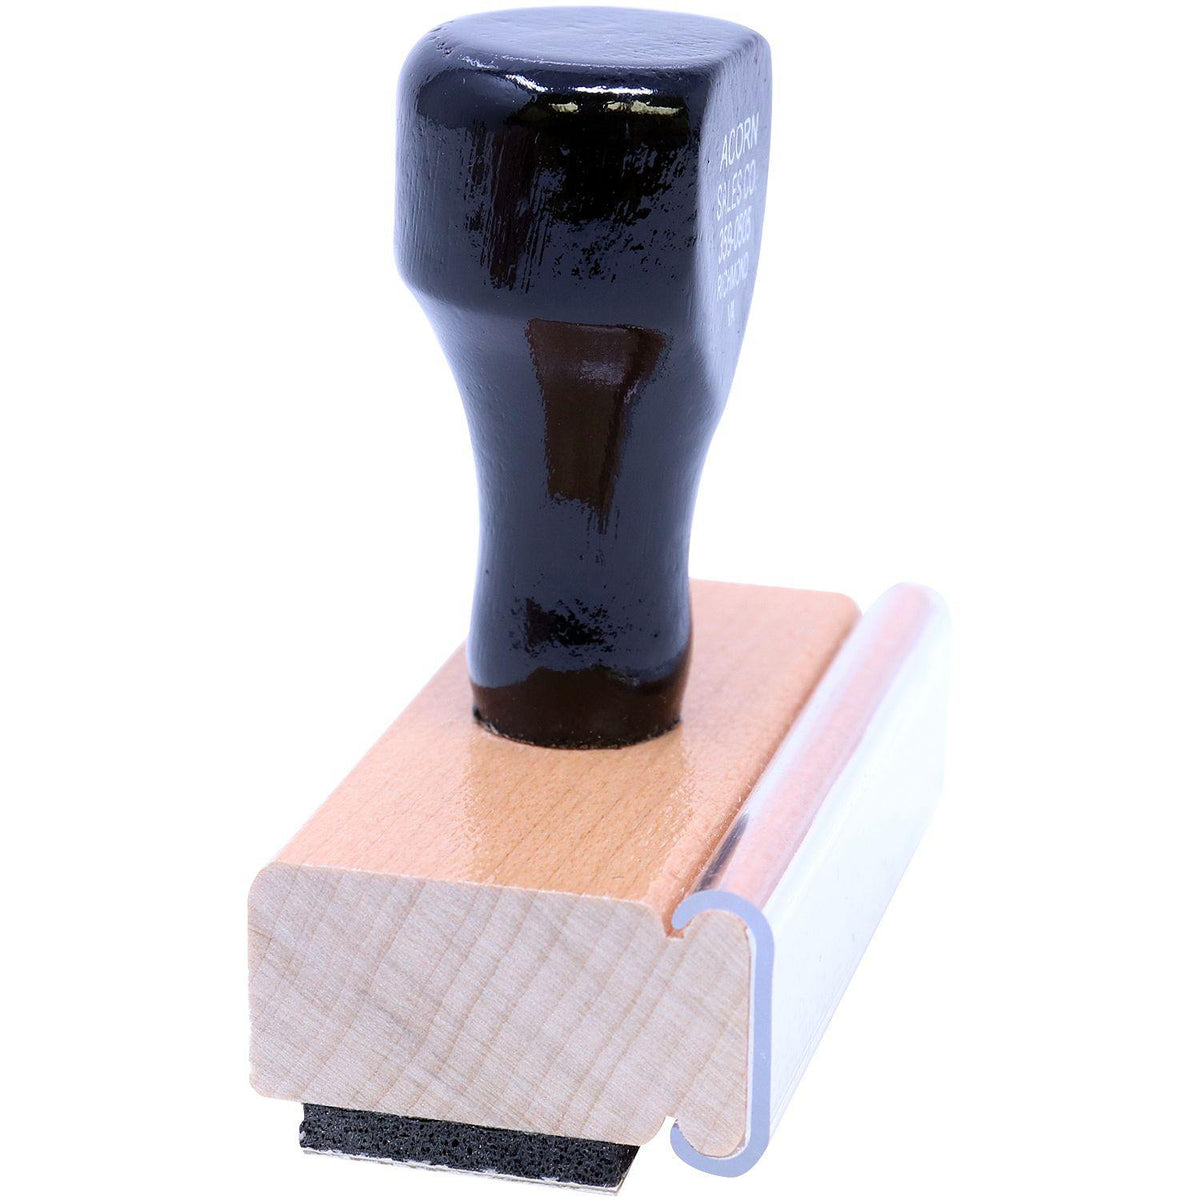 Side View of Large Fyi Rubber Stamp at an Angle